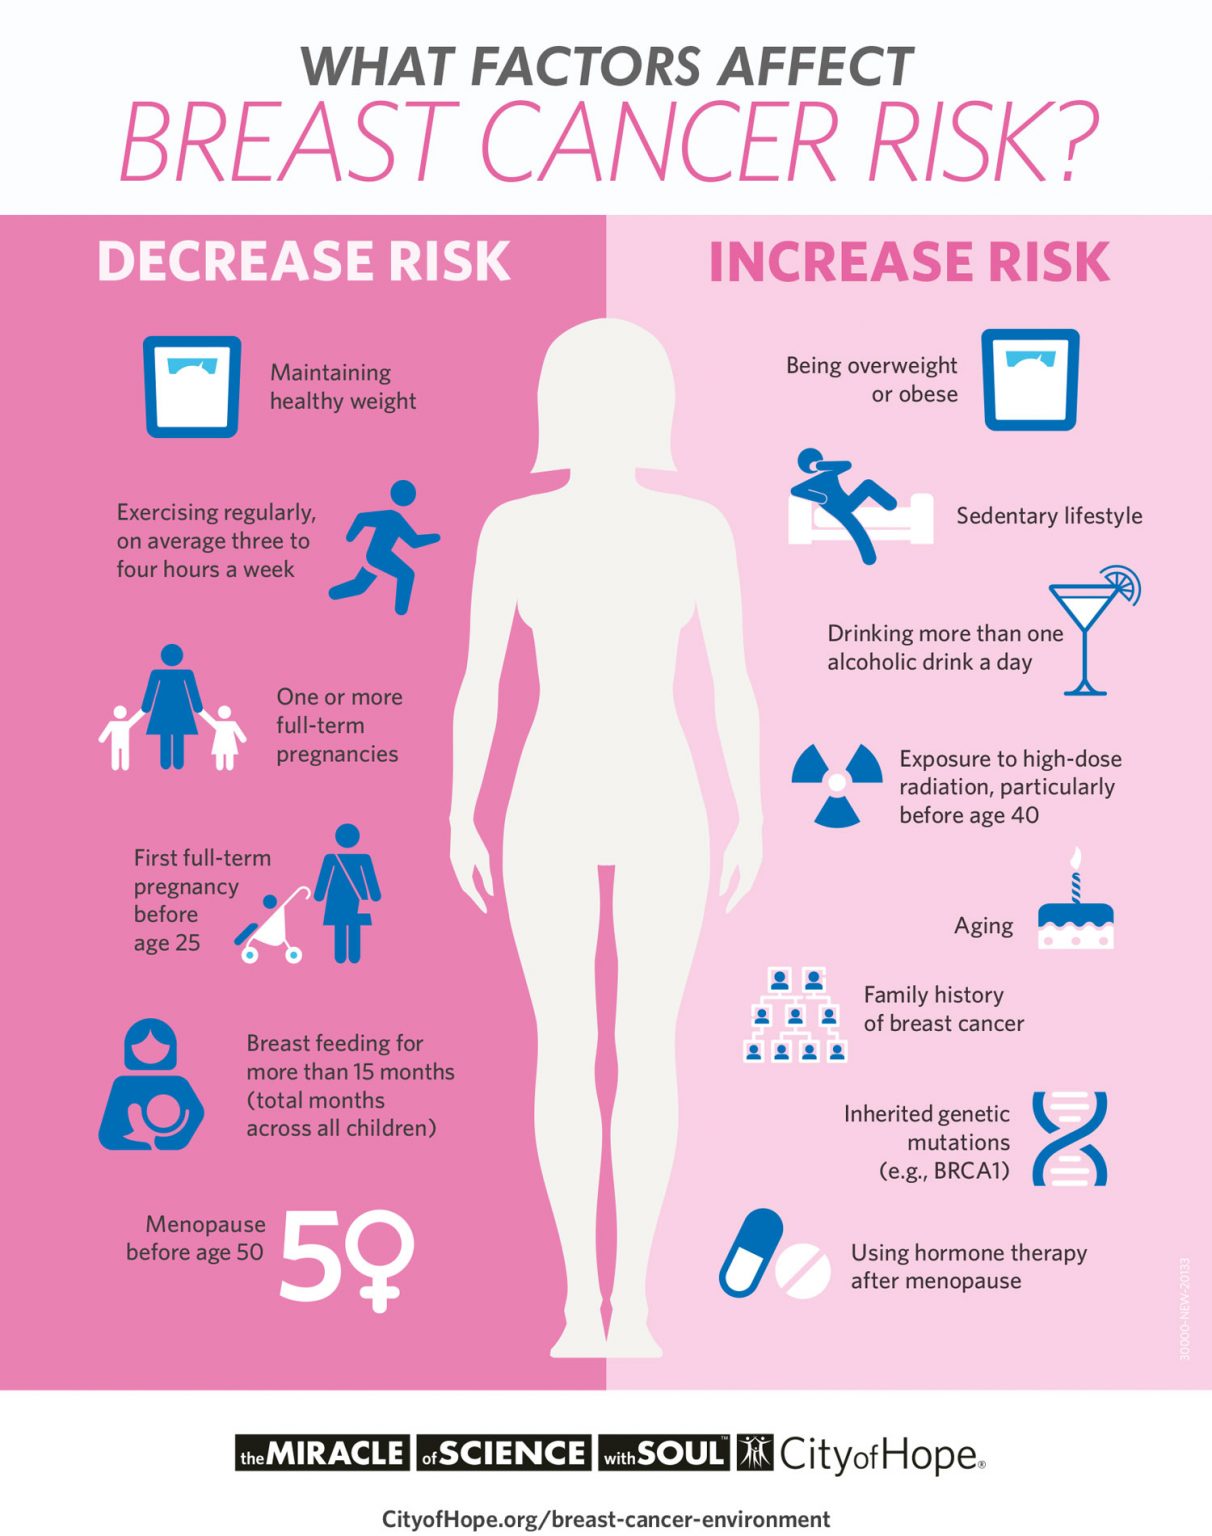 Around 1 In 8 Women Worldwide Are Diagnosed With Breast Cancer In Their 